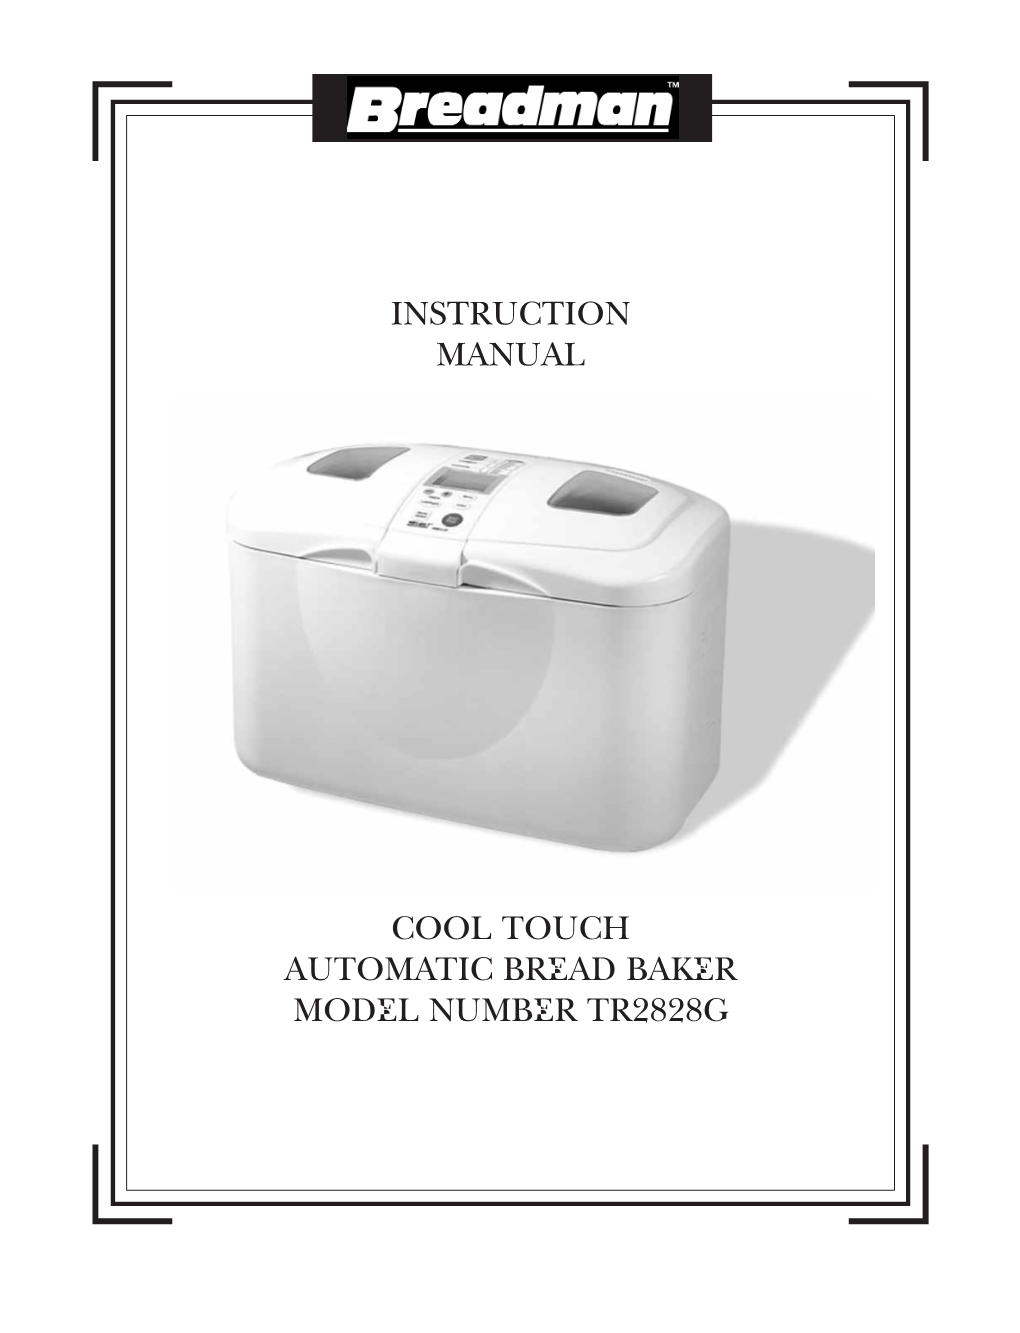 Instruction Manual Cool Touch Automatic Bread Baker Model